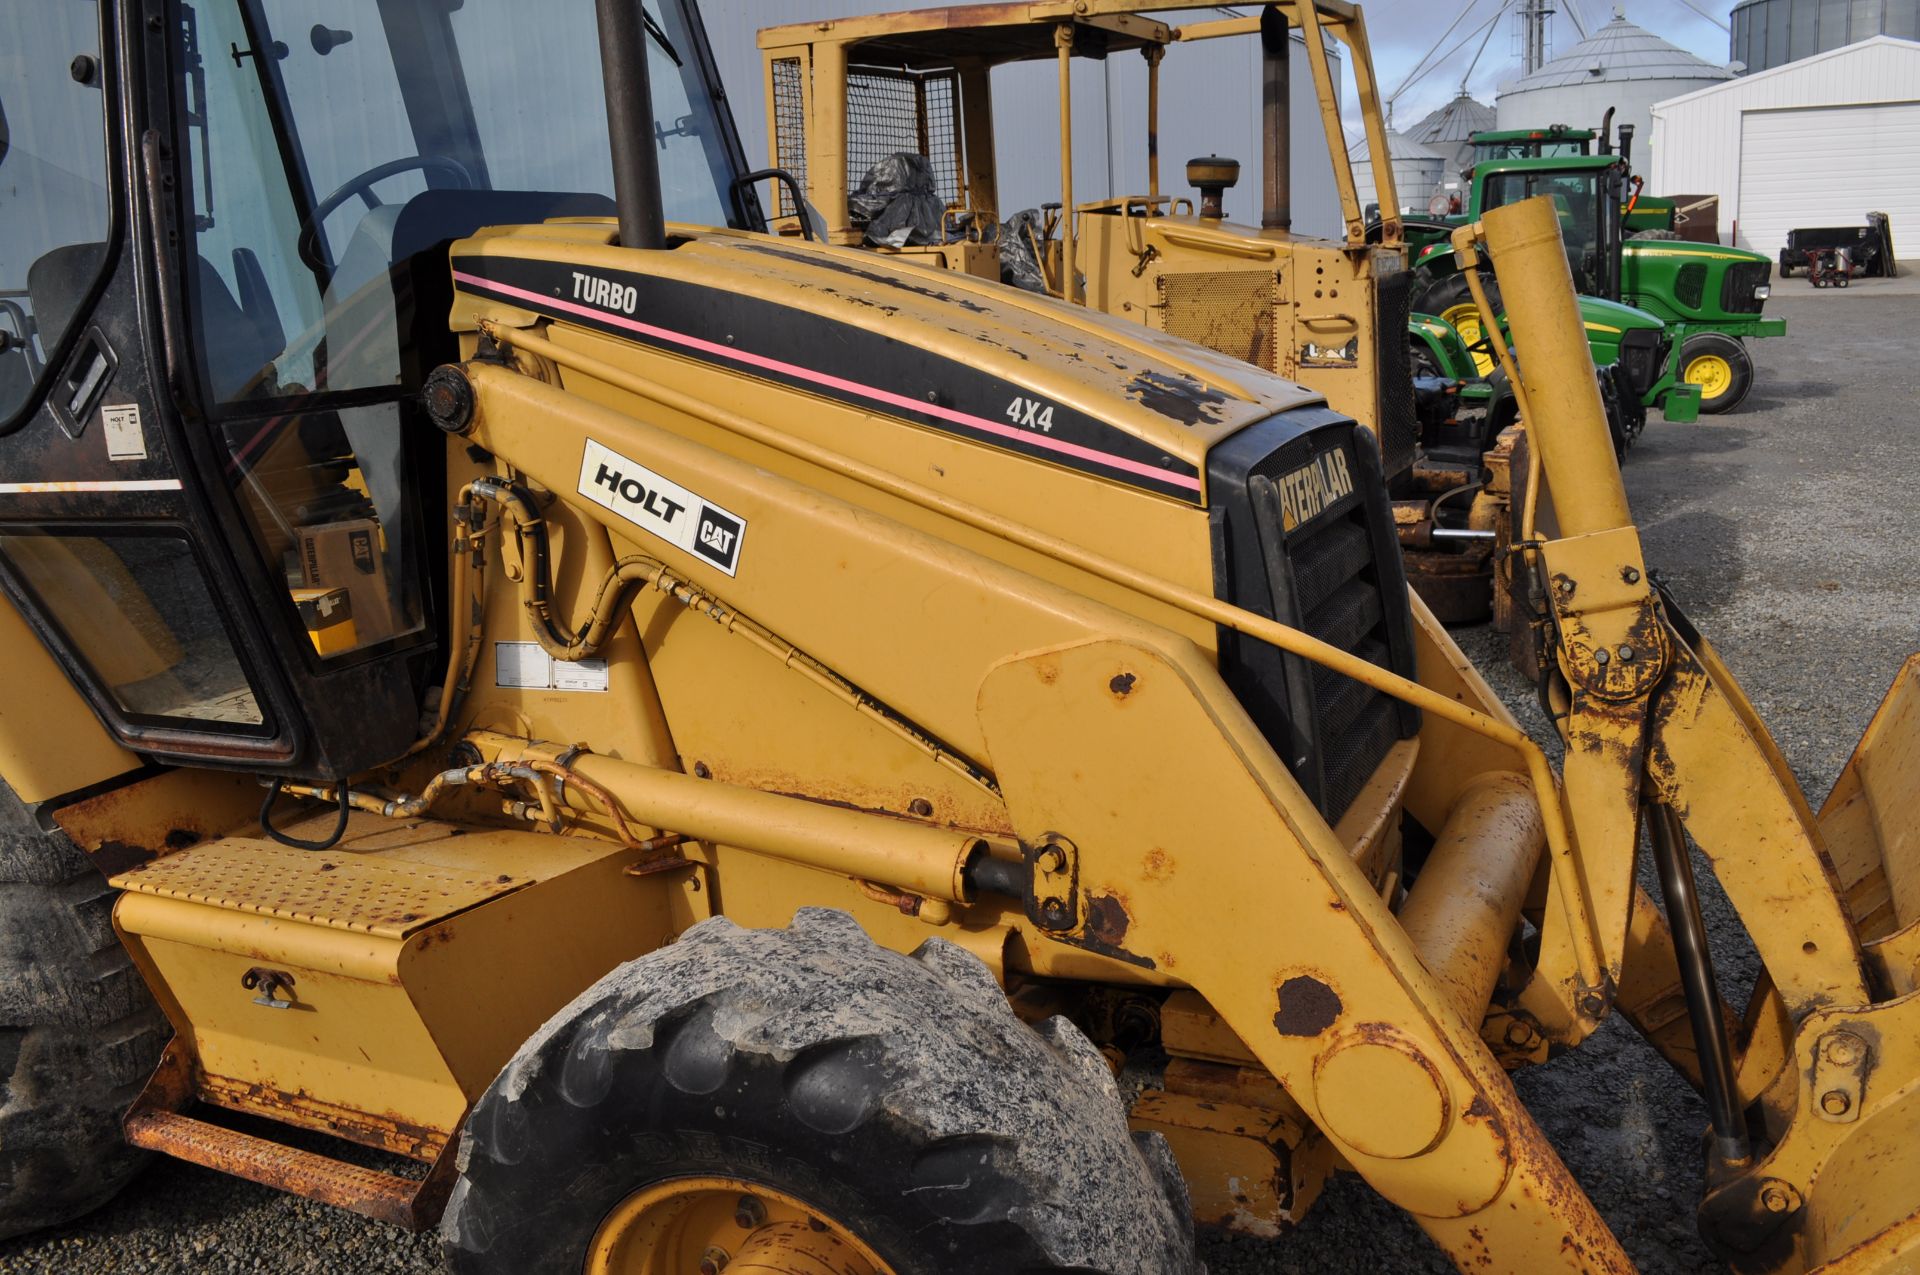 CAT 416C backhoe, 88” bucket, 19.5-24 rear, 12.5/80-18 front, 4x4, 18” and 24” digging buckets - Image 21 of 35